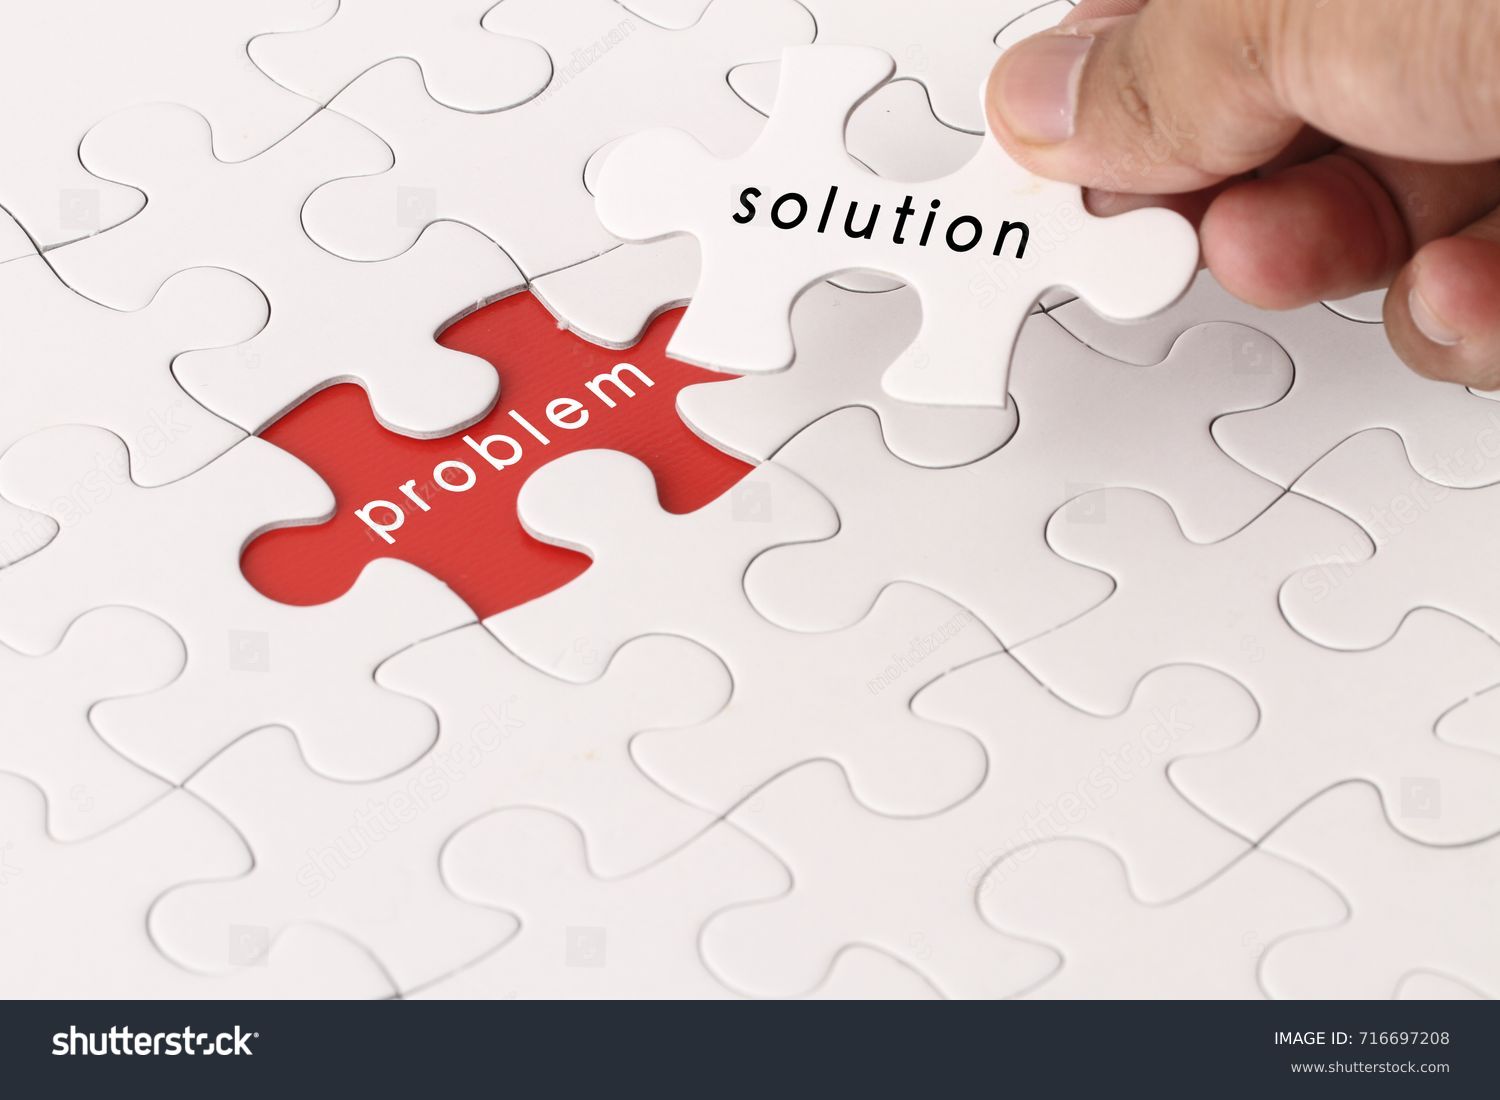 Management concept with hand holding piece of jigsaw puzzle with problem and solution wording #716697208